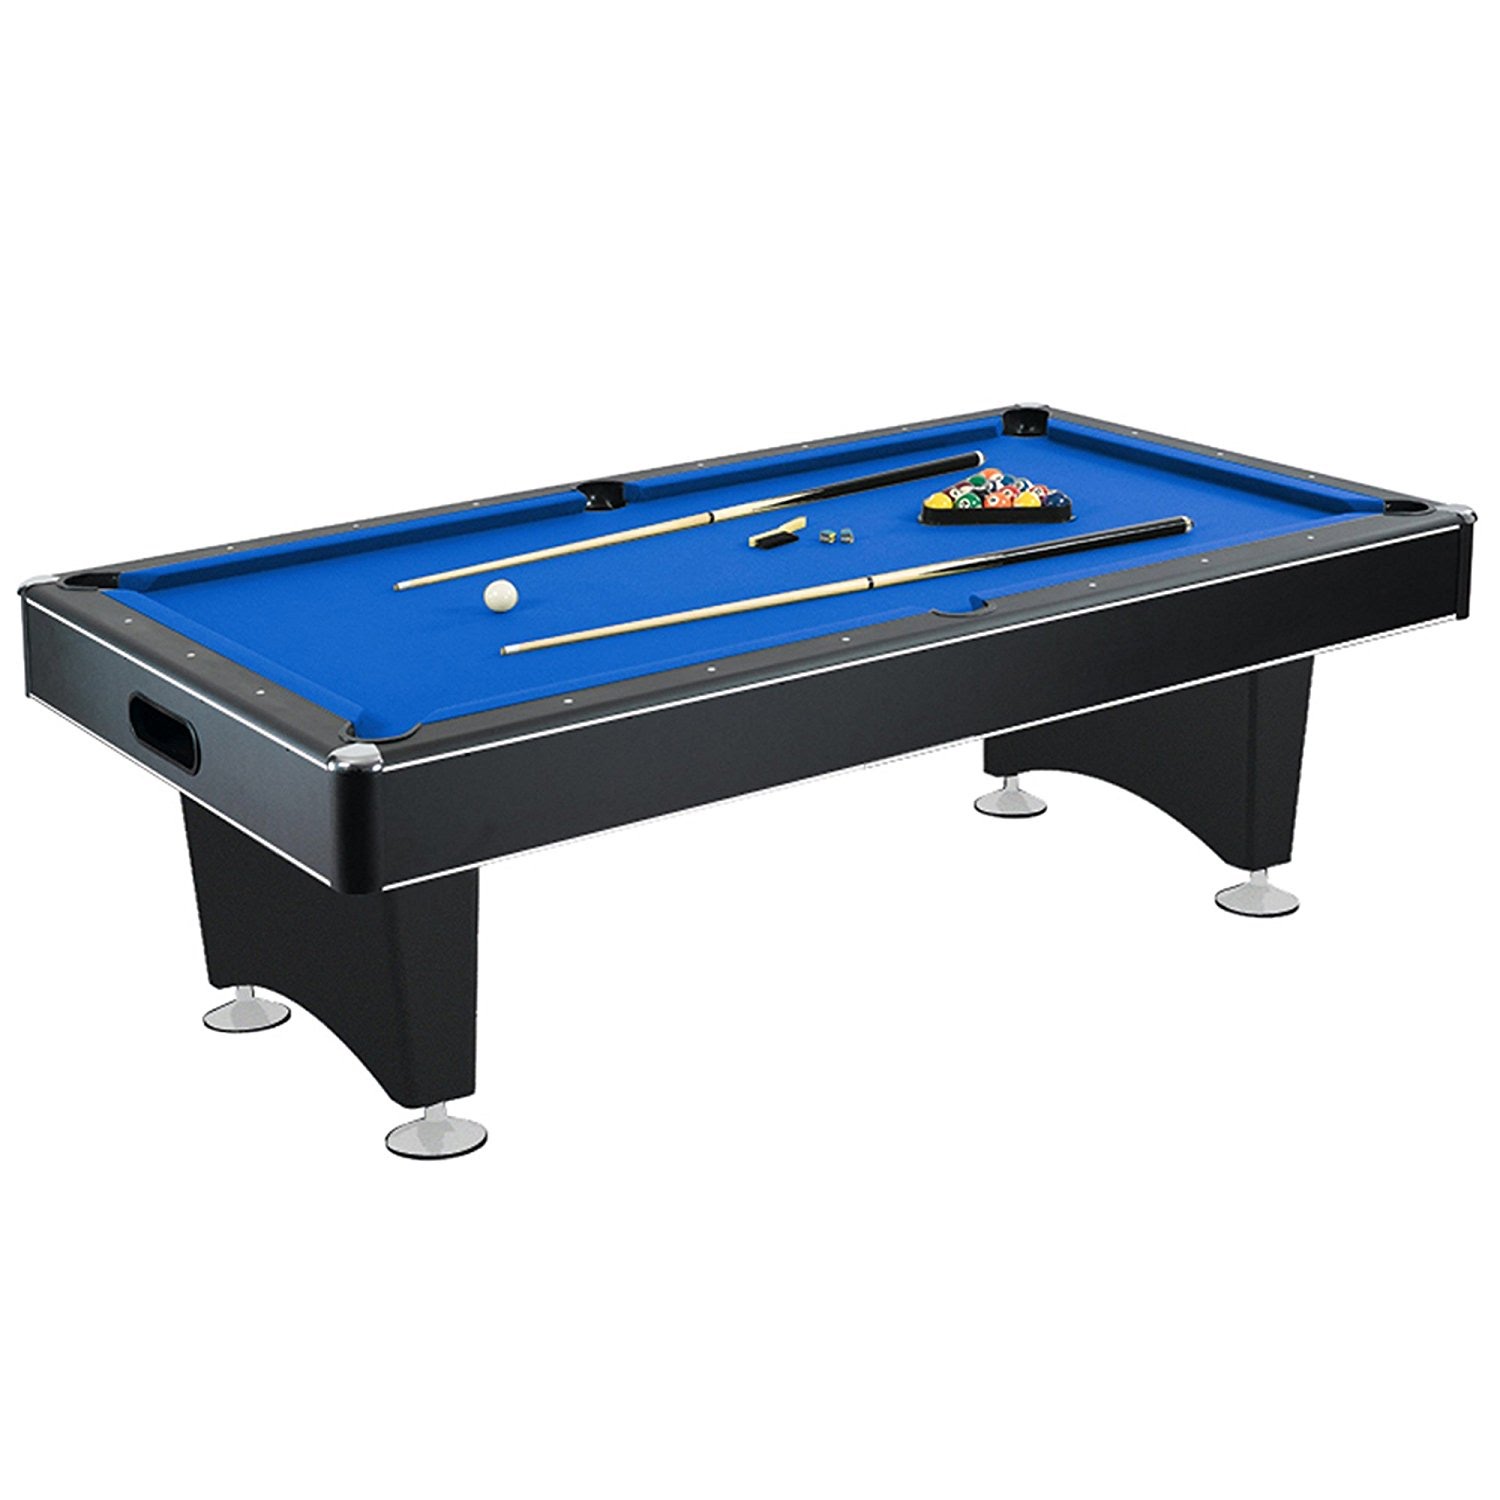 8' L Premium Regulation Pool Table, 1" thick Slate For Tournament Quality Play